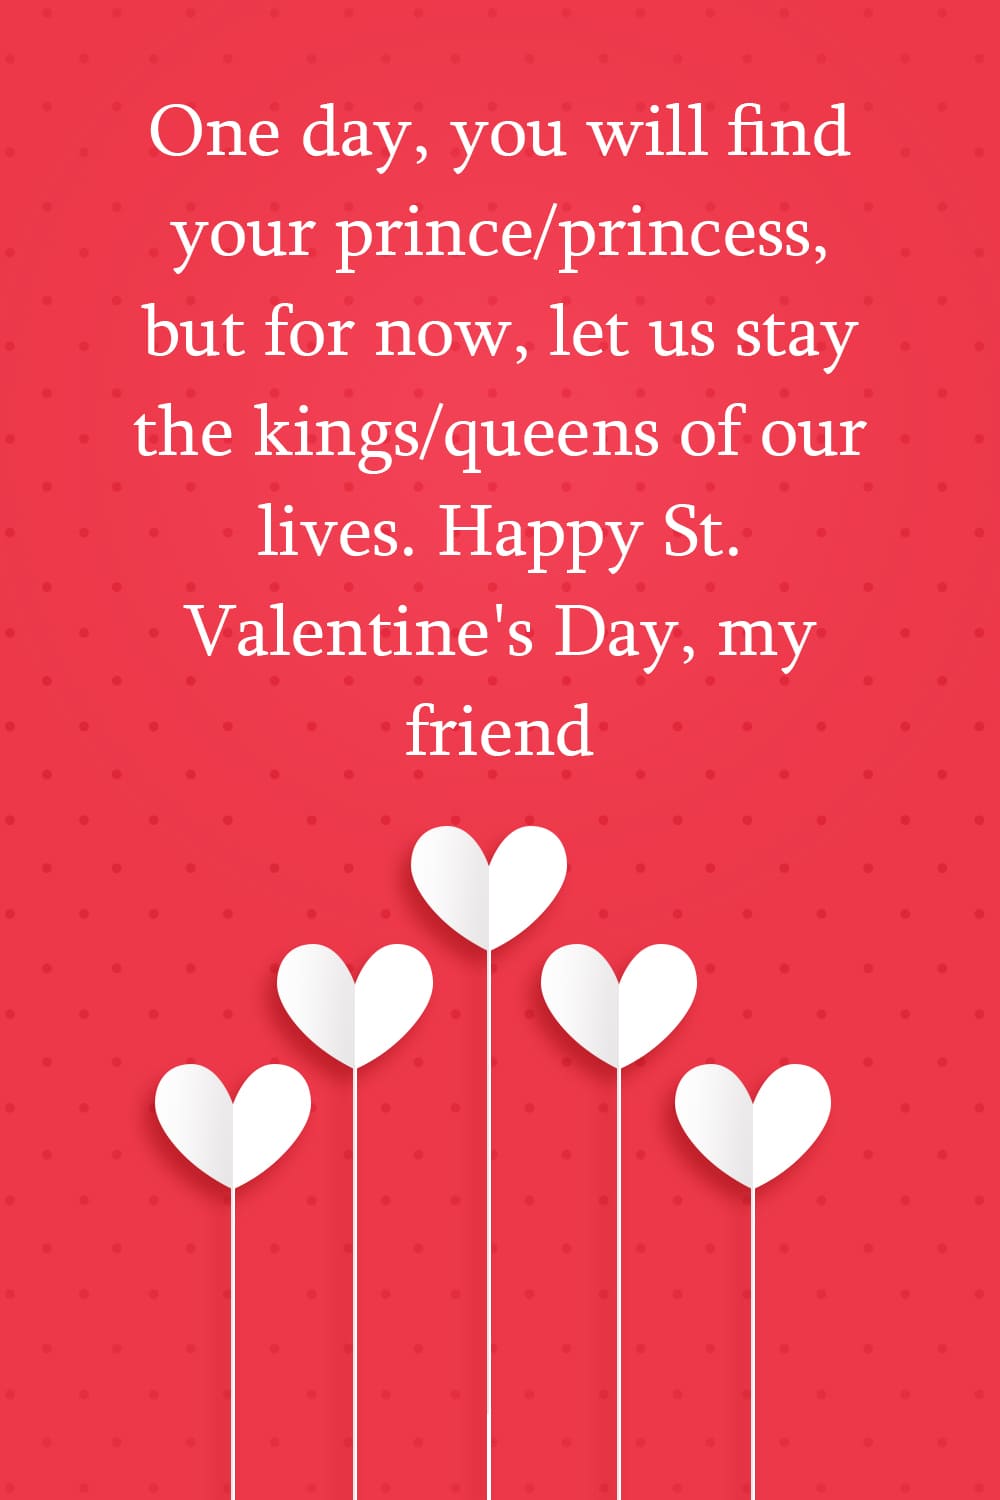 40+ Awesome Valentine's Day Quotes 2021 - Romantic Messages for ...